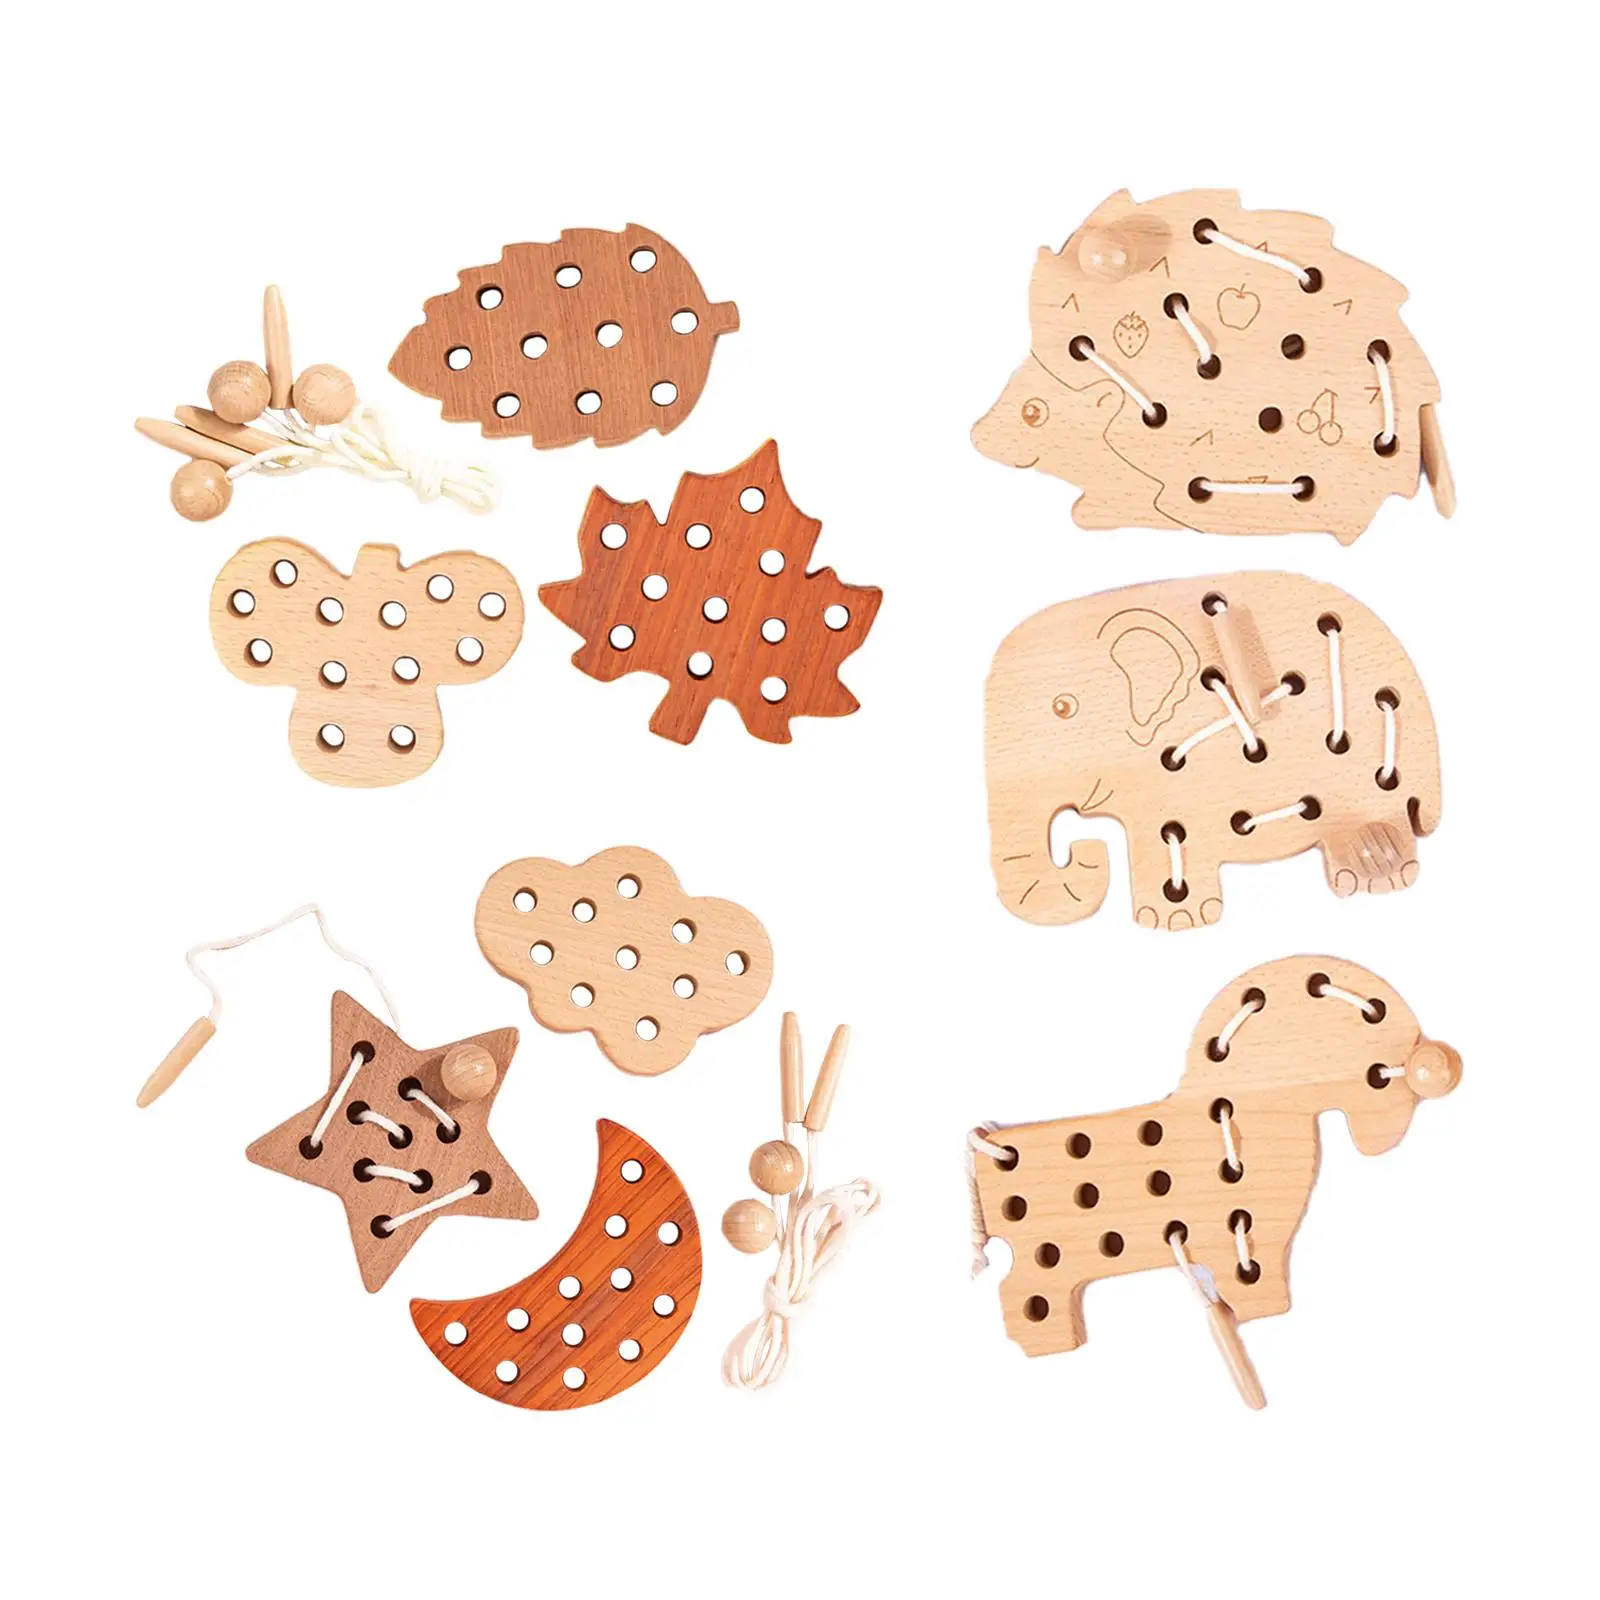 3 Pieces Wooden Lacing Threading Toys Travel Montessori Toys Kindergarten Wood Lace Block Puzzle for Airplane Boys Toddlers